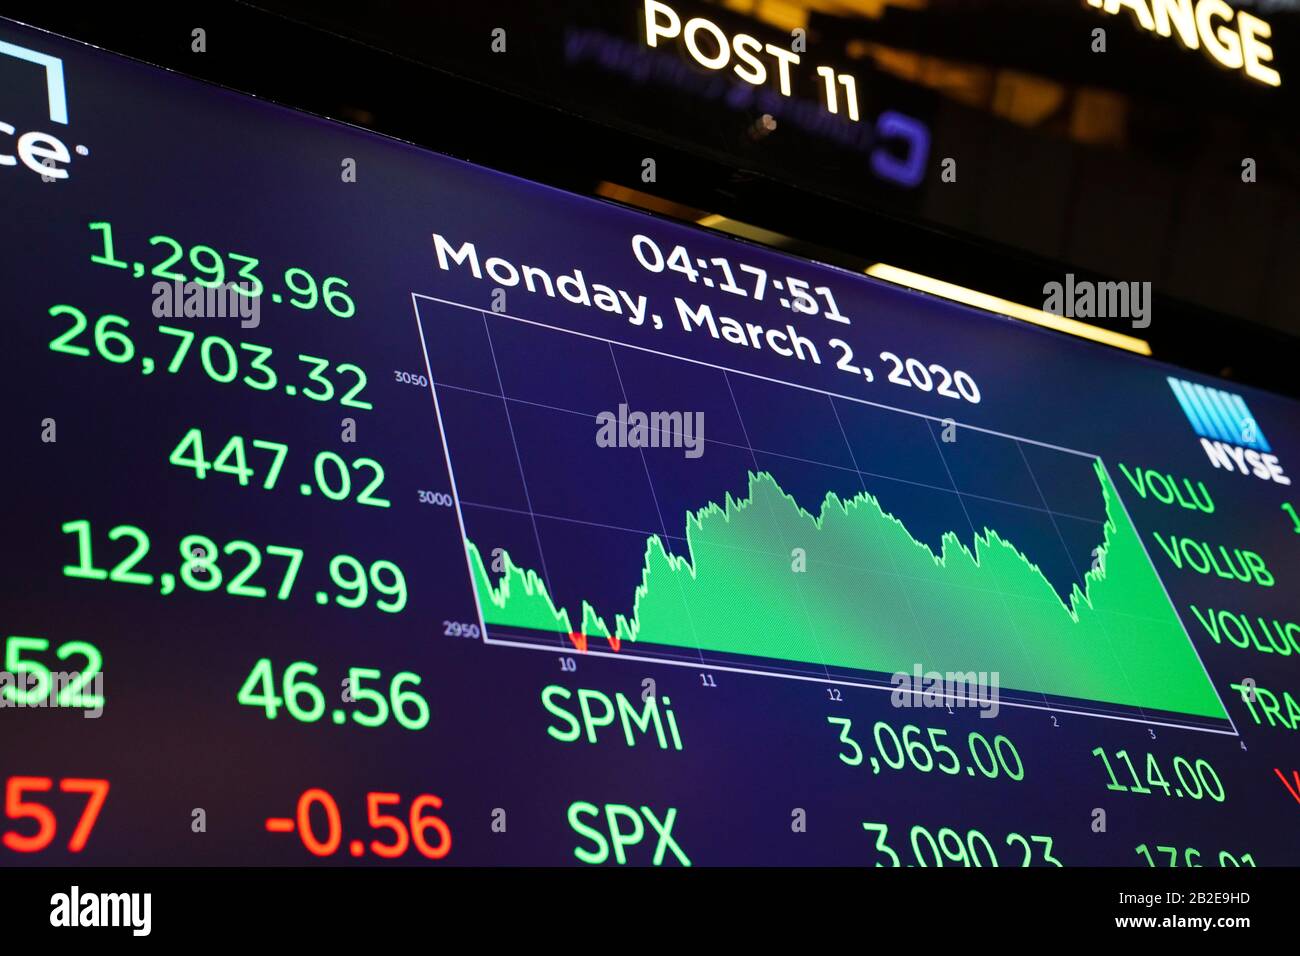 New York, USA. 2nd Mar, 2020. An electronic screen shows the trading data at New York Stock Exchange in New York, the United States, on March 2, 2020. U.S. stocks finished sharply higher on Monday following last week's rout. The Dow Jones Industrial Average soared 1,293.96 points, or 5.09 percent, to 26,703.32. The S&P 500 rallied 136.01 points, or 4.60 percent, to 3,090.23. The Nasdaq Composite Index increased 384.80 points, or 4.49 percent, to 8,952.16. Credit: Wang Ying/Xinhua/Alamy Live News Stock Photo